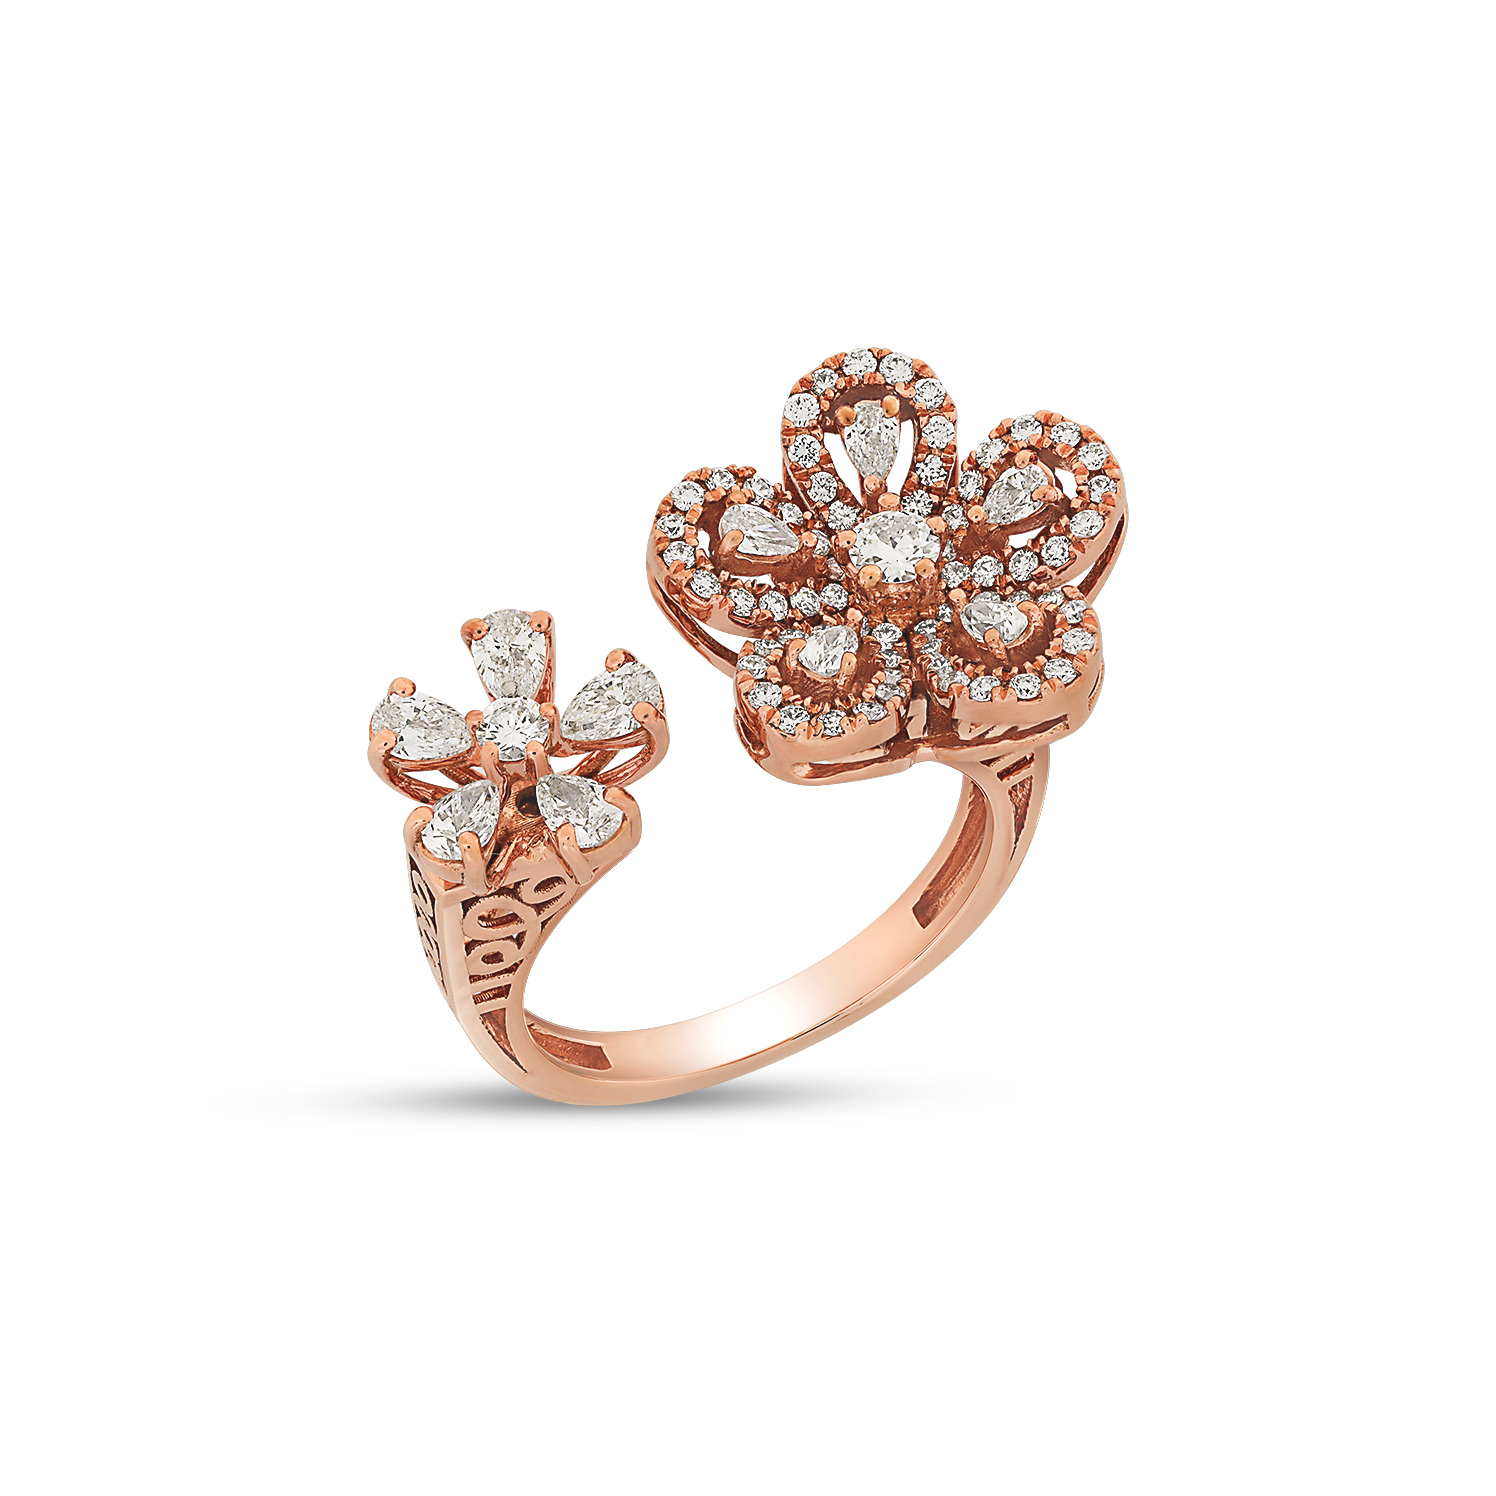 Buy Flower Shaped Ring Online In India - Etsy India